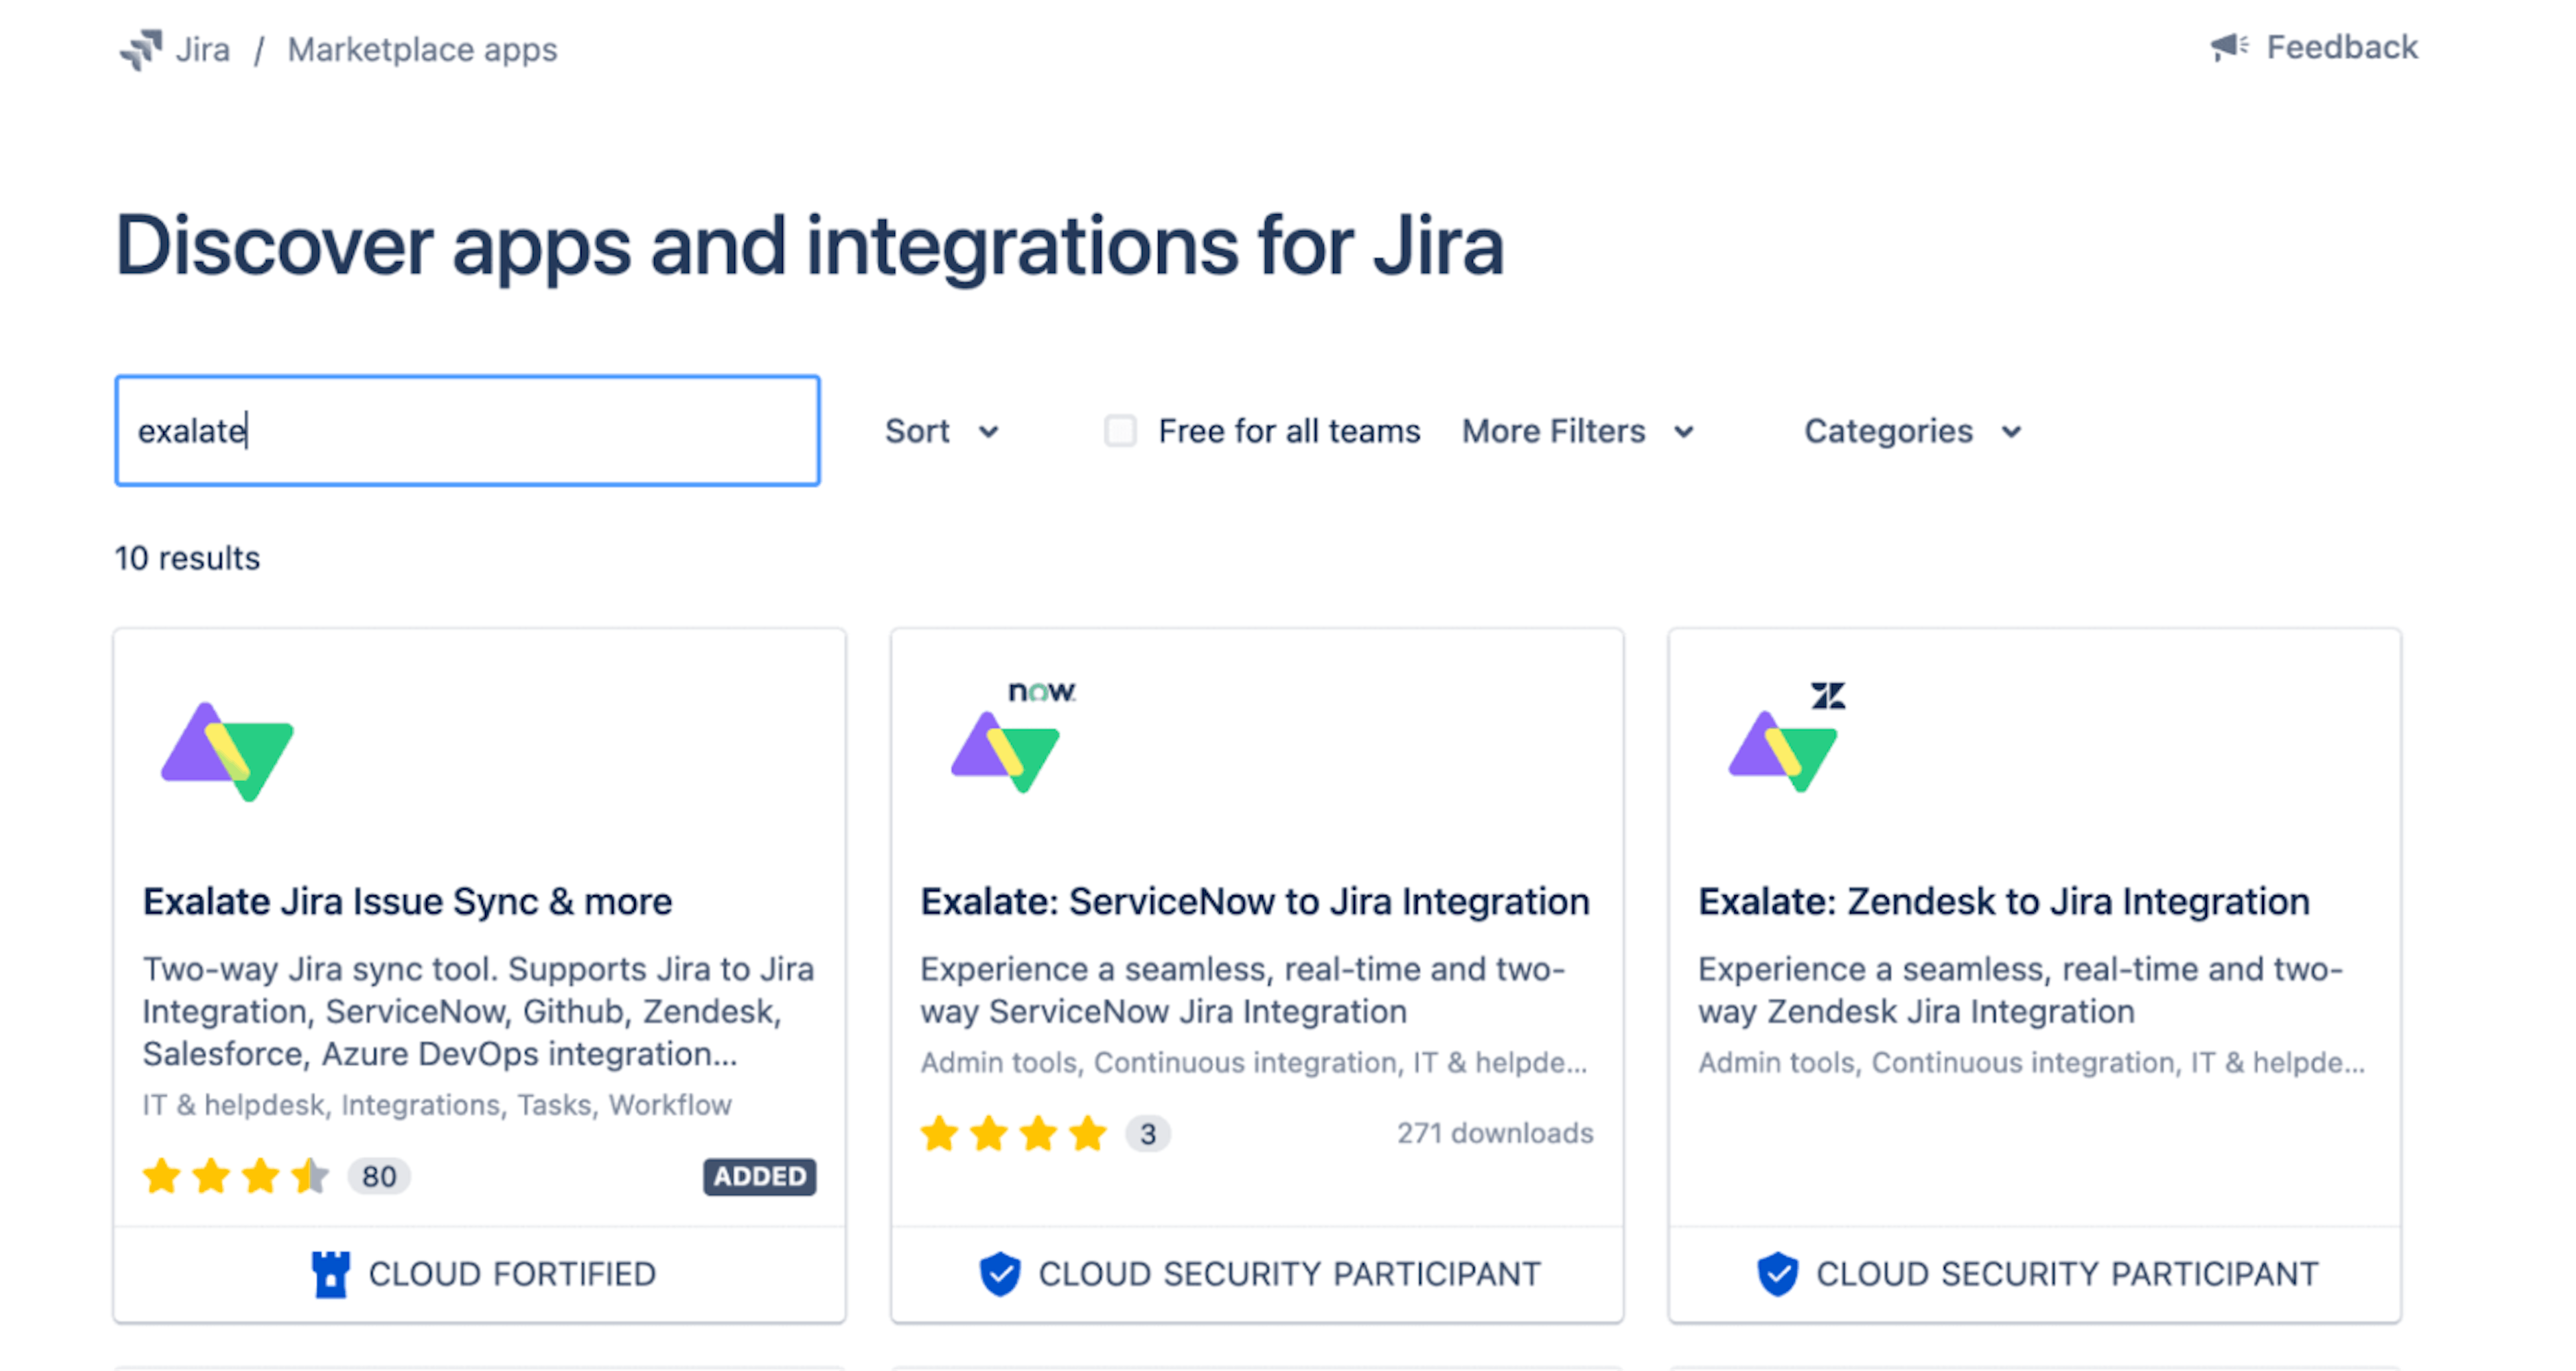 Exalate Jira issue sync & more